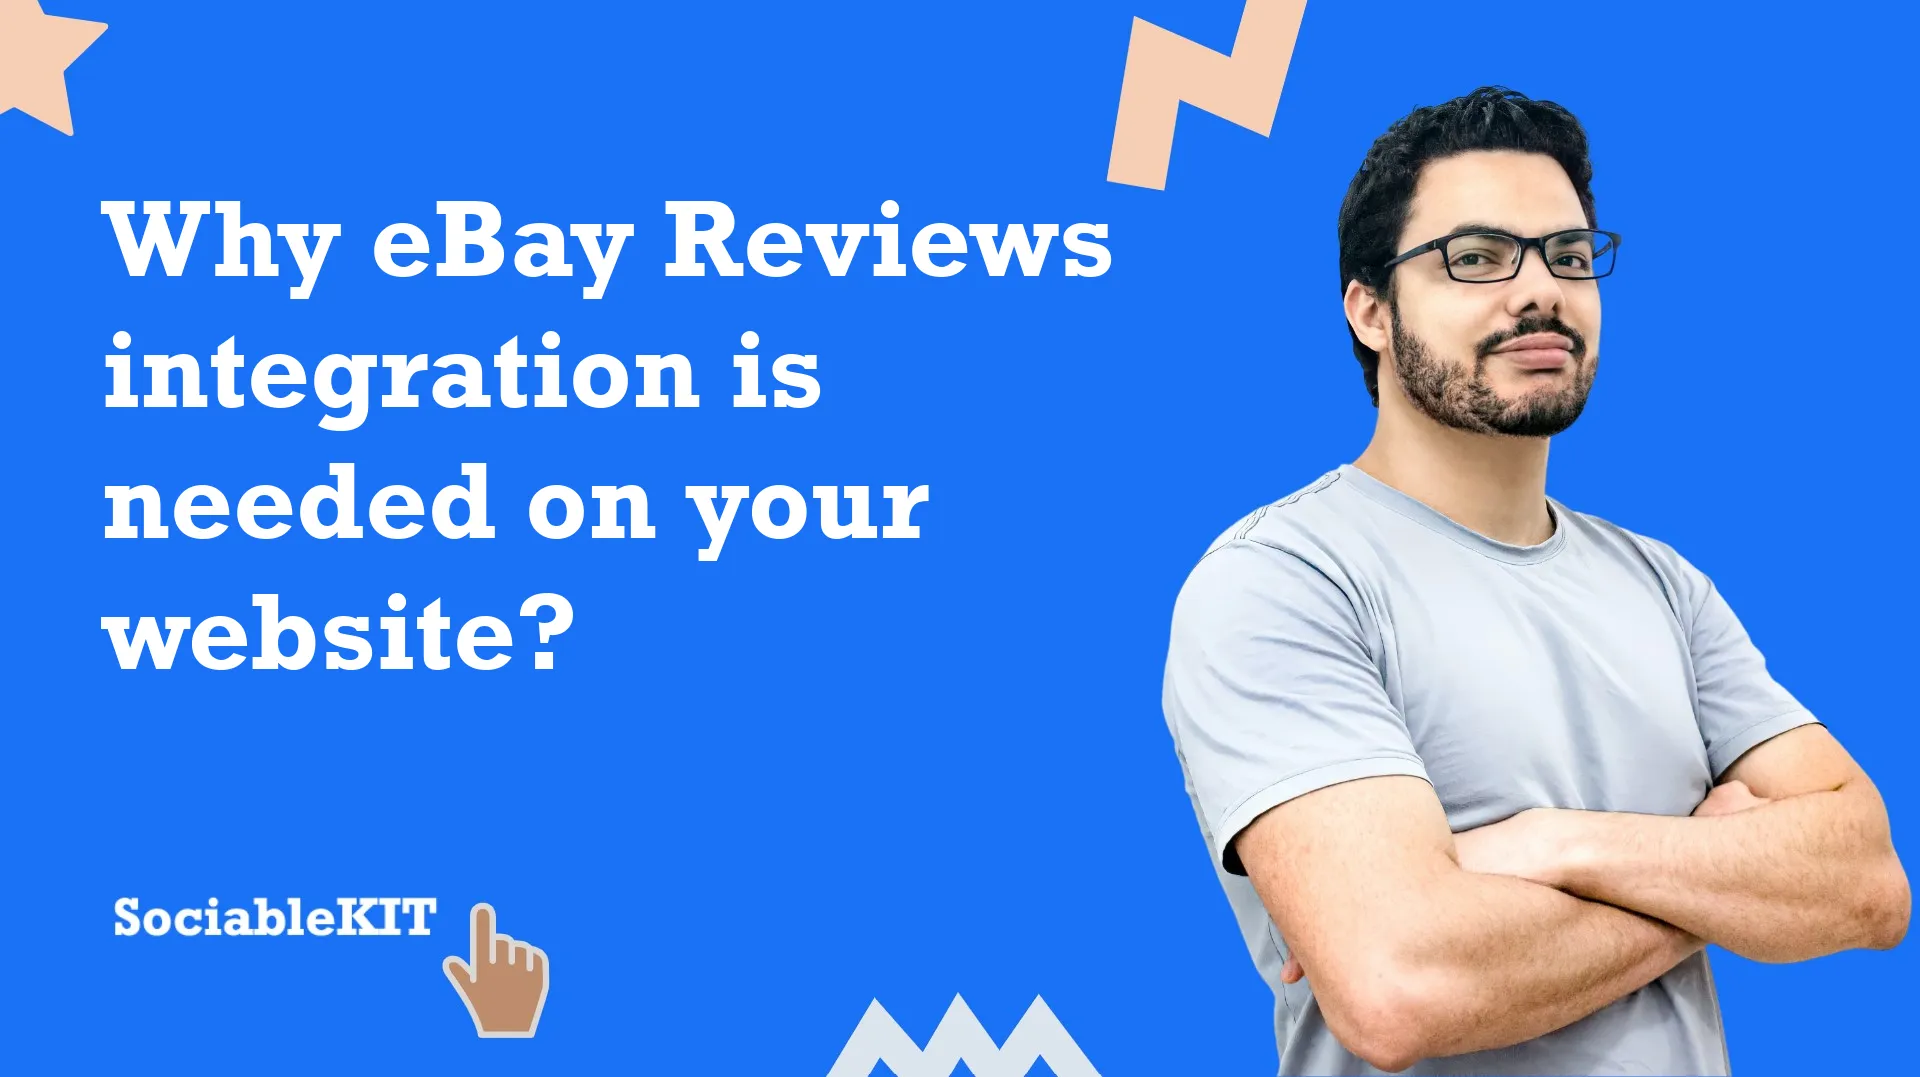 Why eBay Reviews integration is needed on your website?